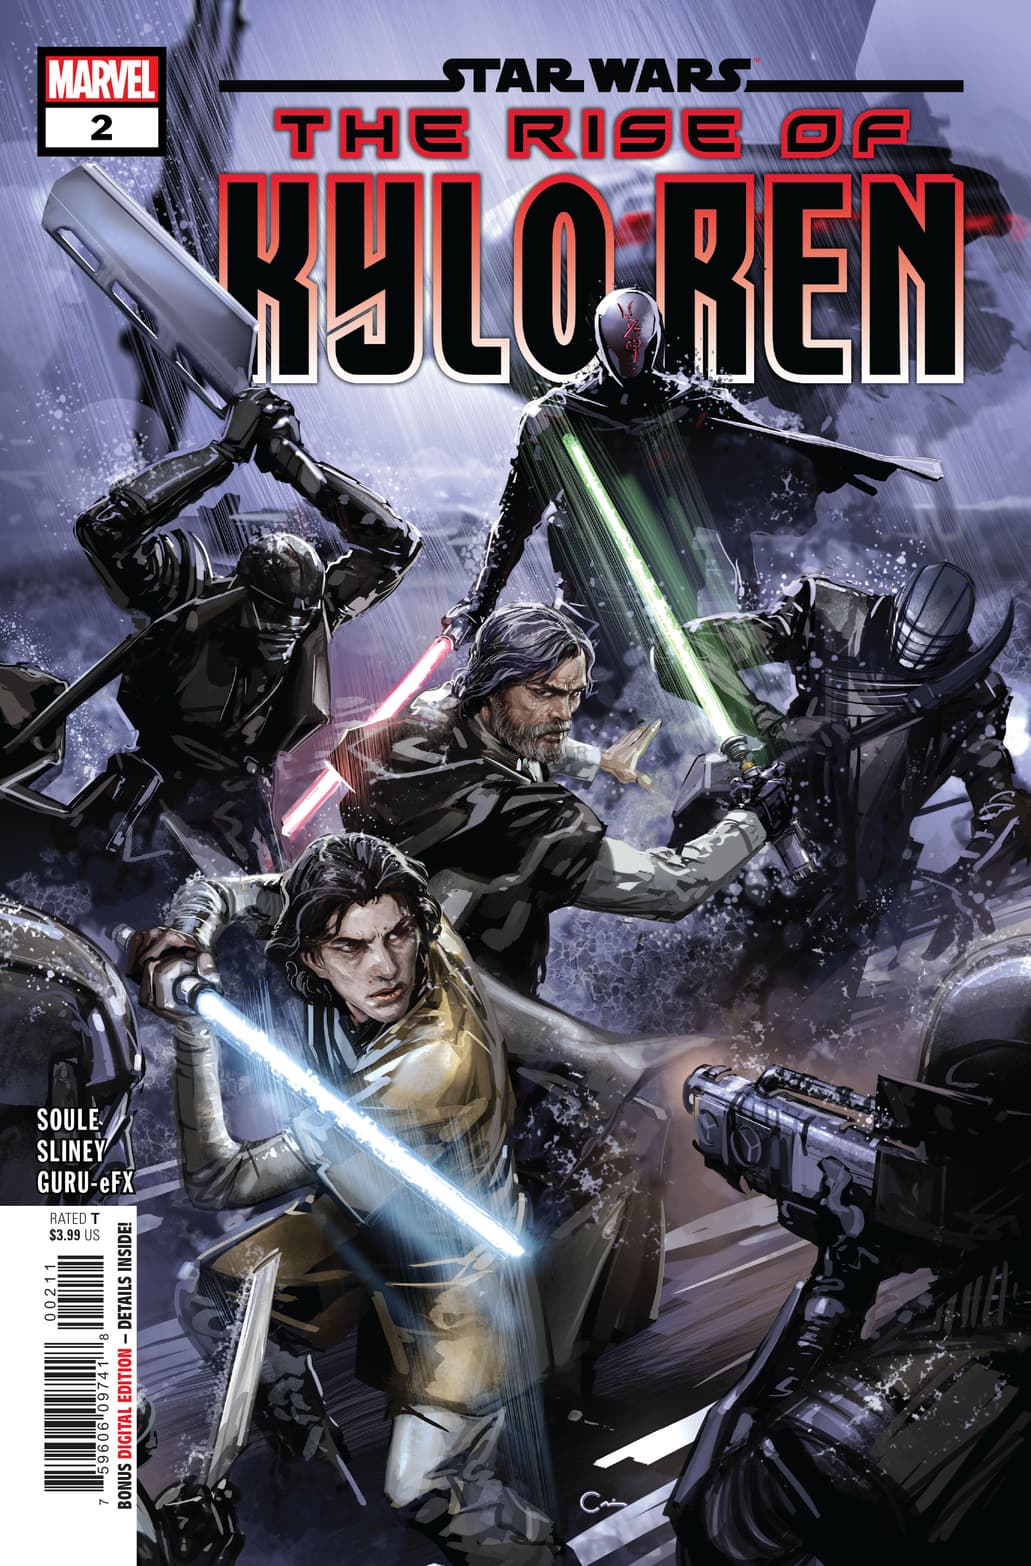 STAR WARS: THE RISE OF KYLO REN #2